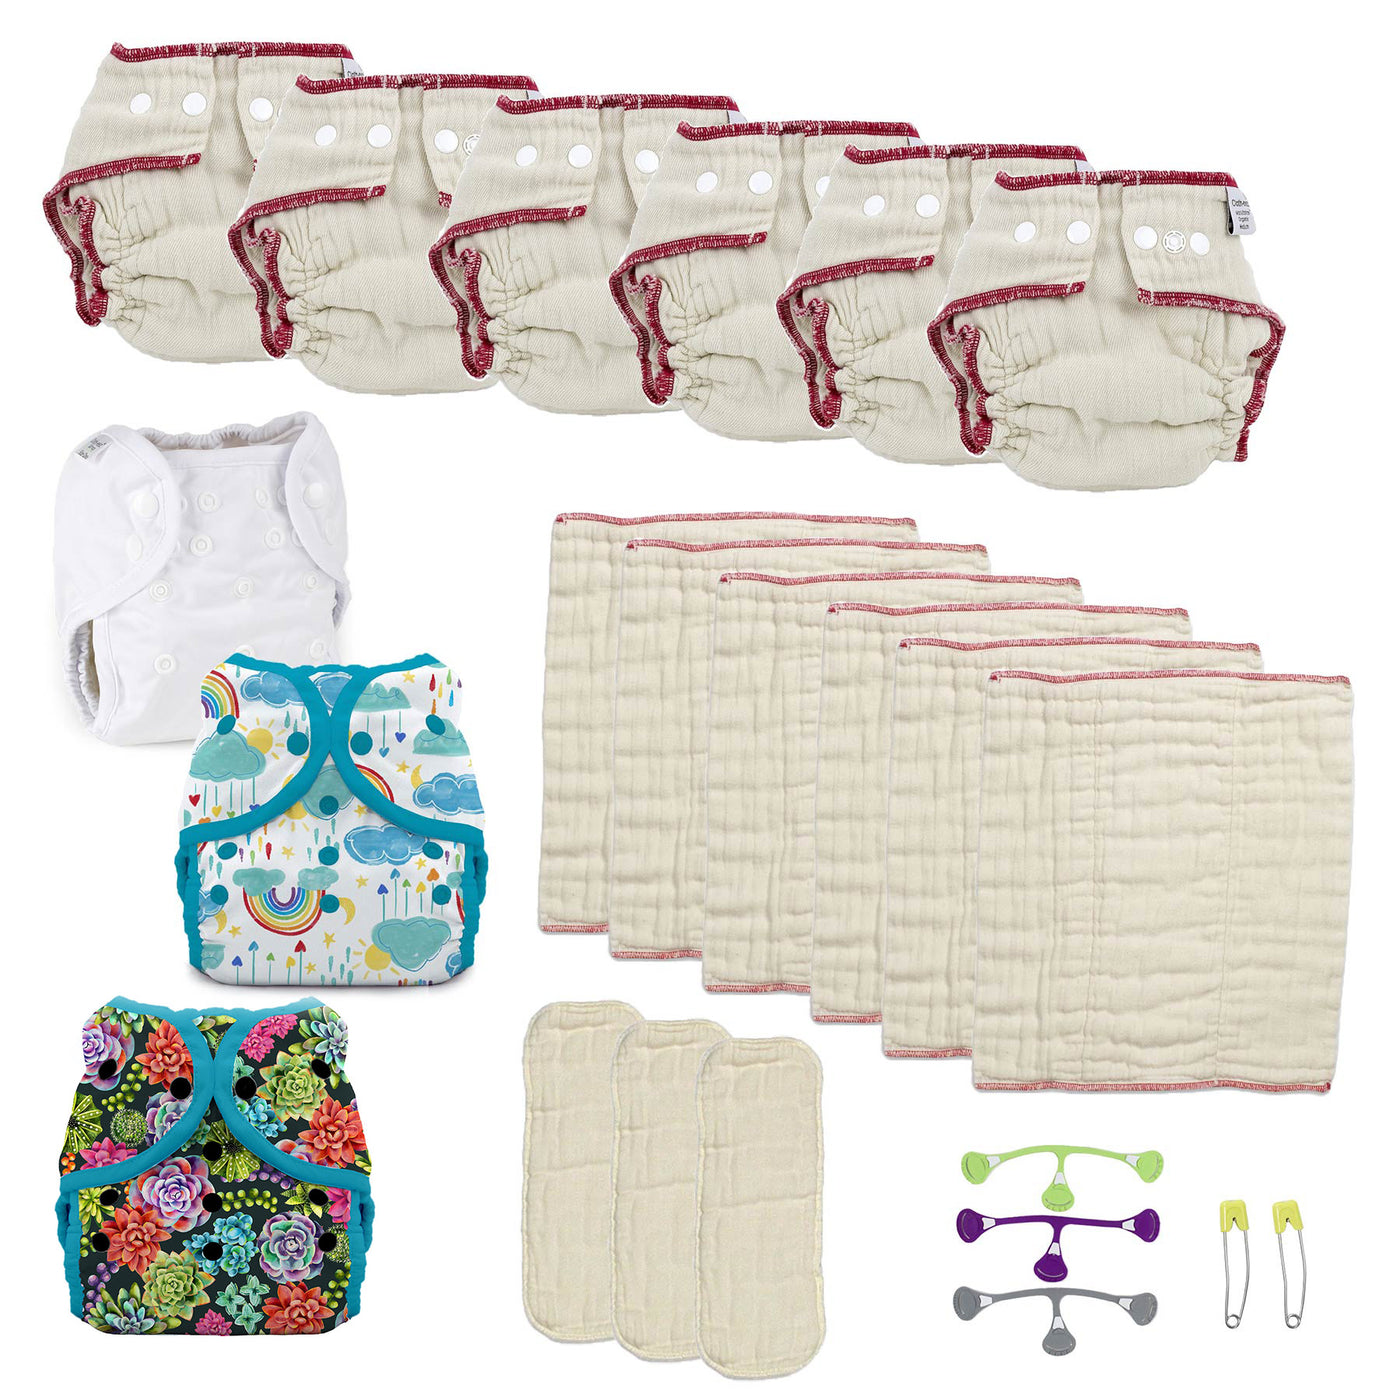 try two kinds of cloth diapers kit for a girl